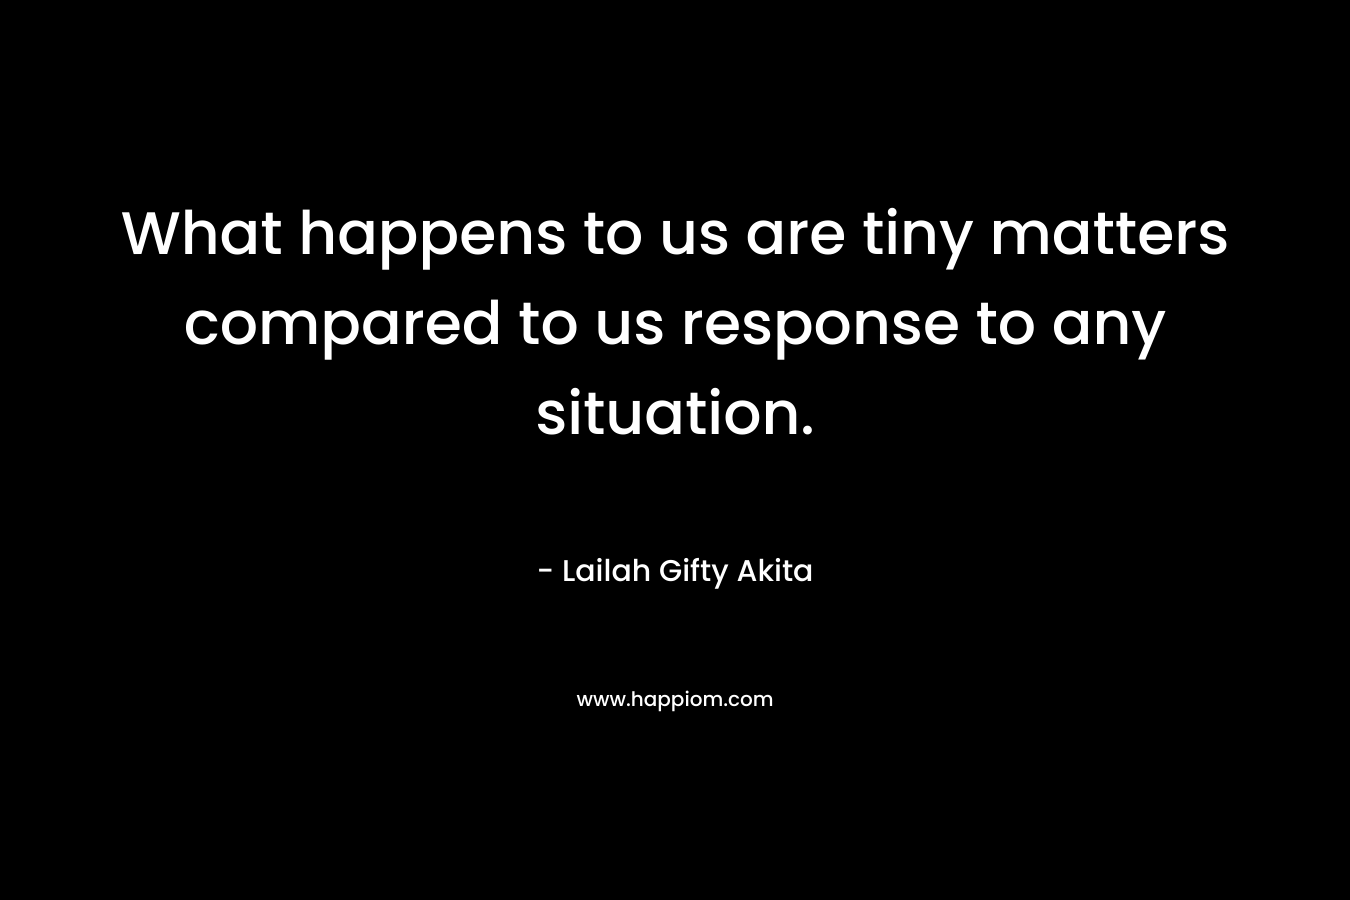 What happens to us are tiny matters compared to us response to any situation.